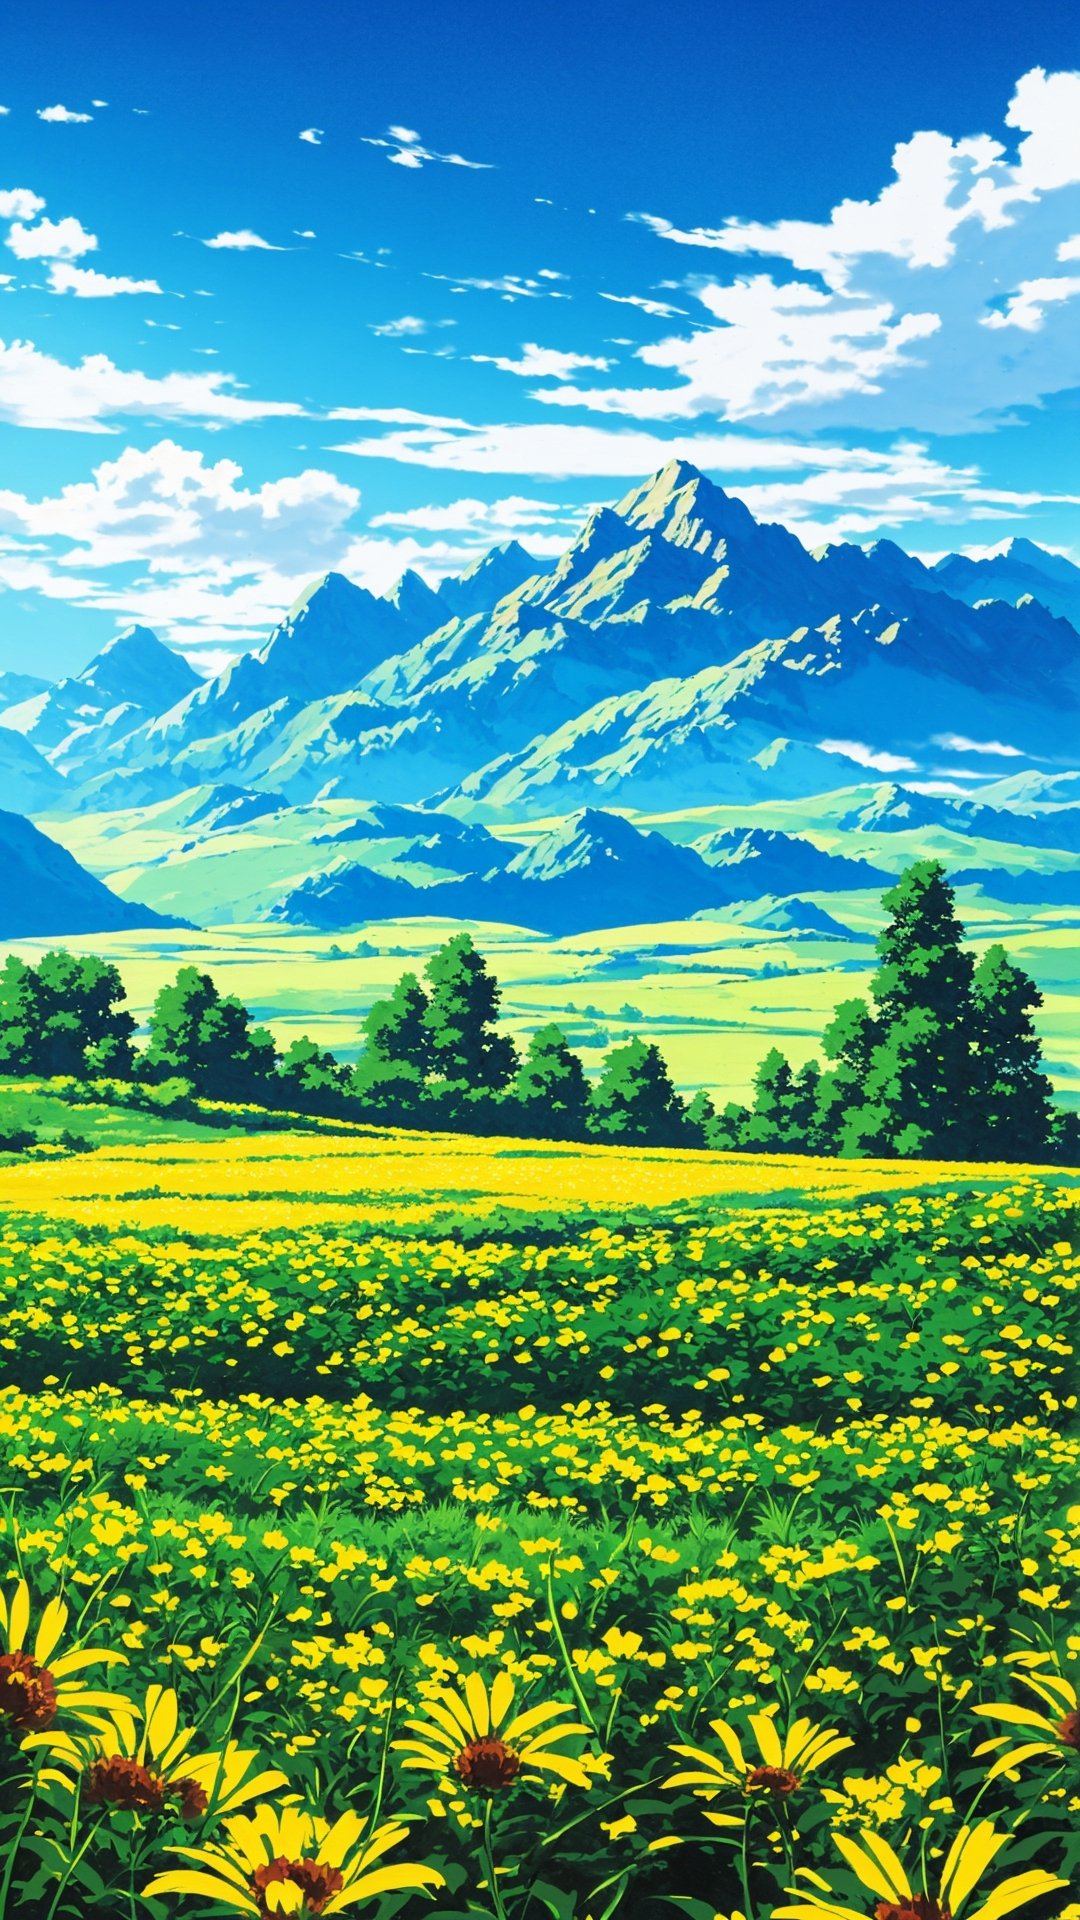  a wide field with flower field, and a big tree , mountain in background,

 4k, ultra hd, high quality, wide view, anime scenery, crispy detailed picture